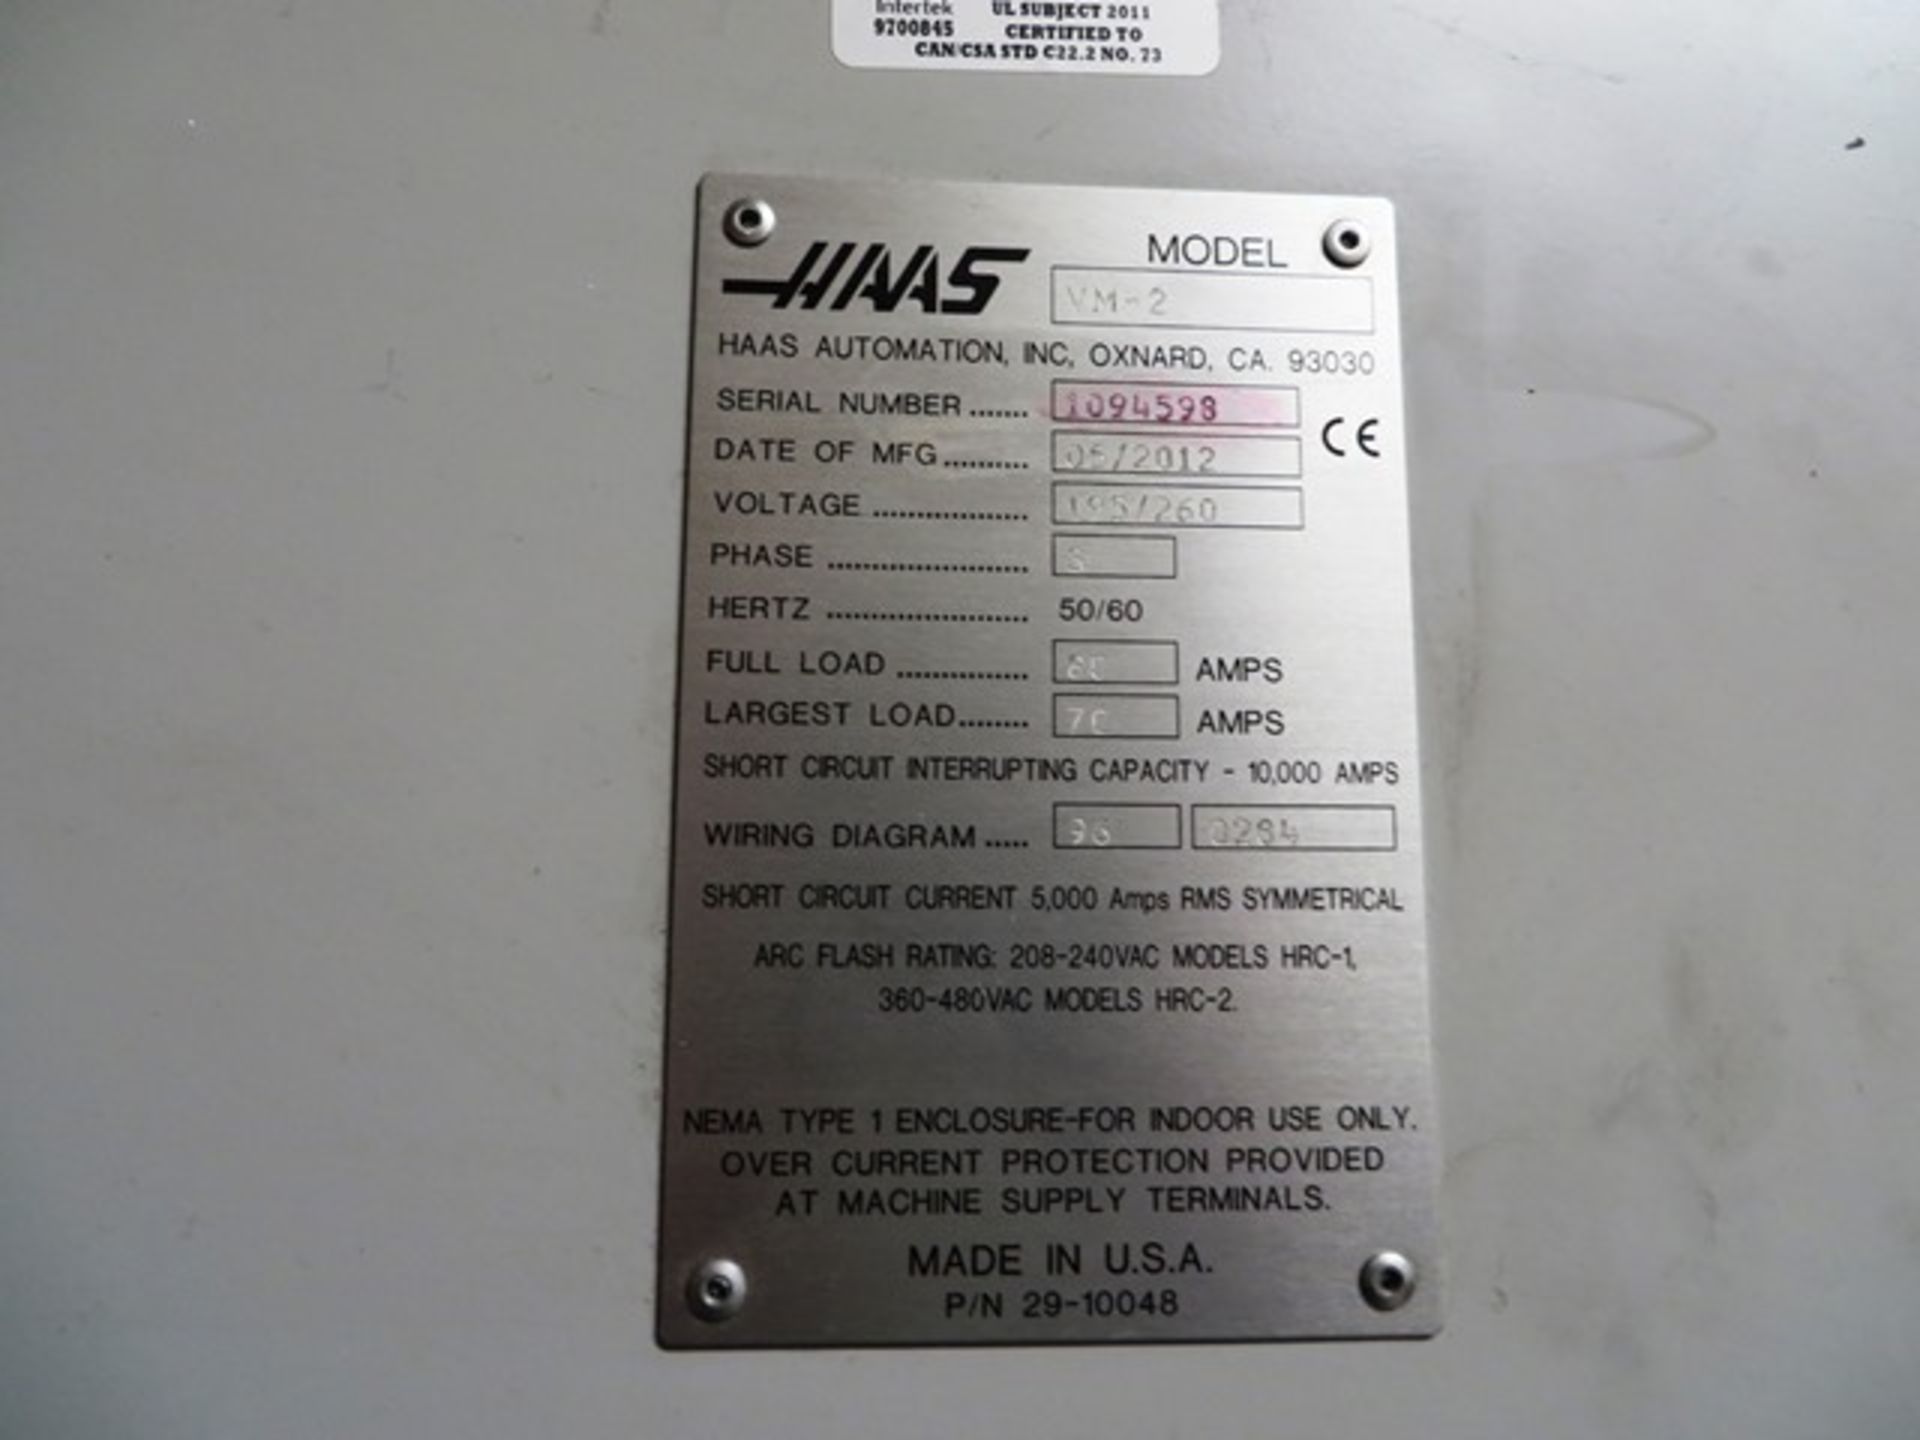 HAAS VM2 4-Axis CNC Vertical Machining Center - Image 7 of 7